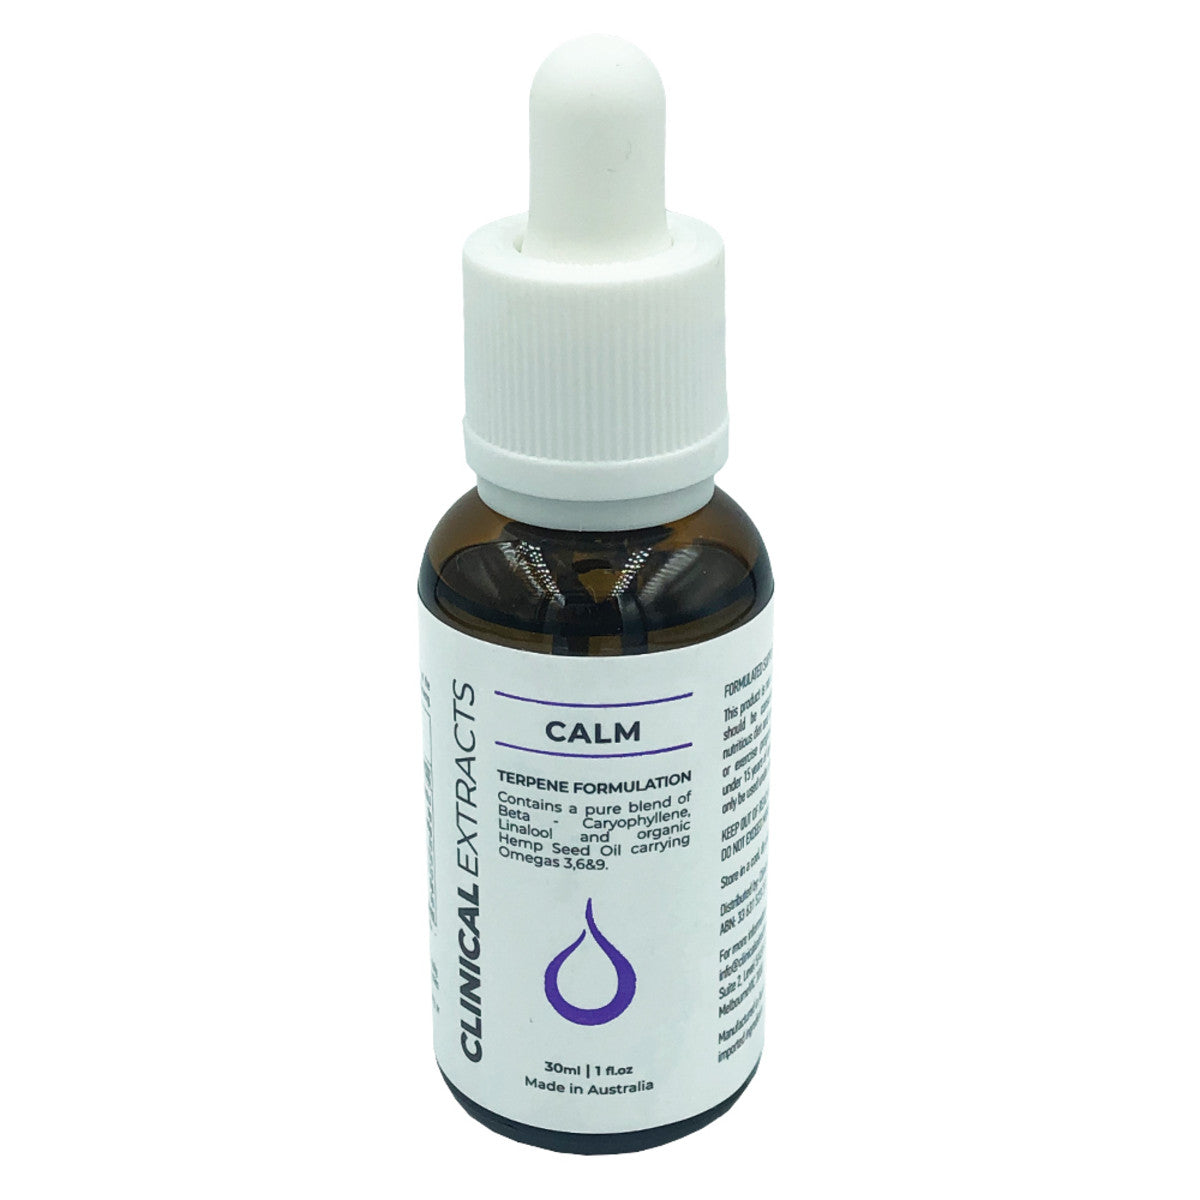 Clinical Extracts - Terpene Formulation Calm